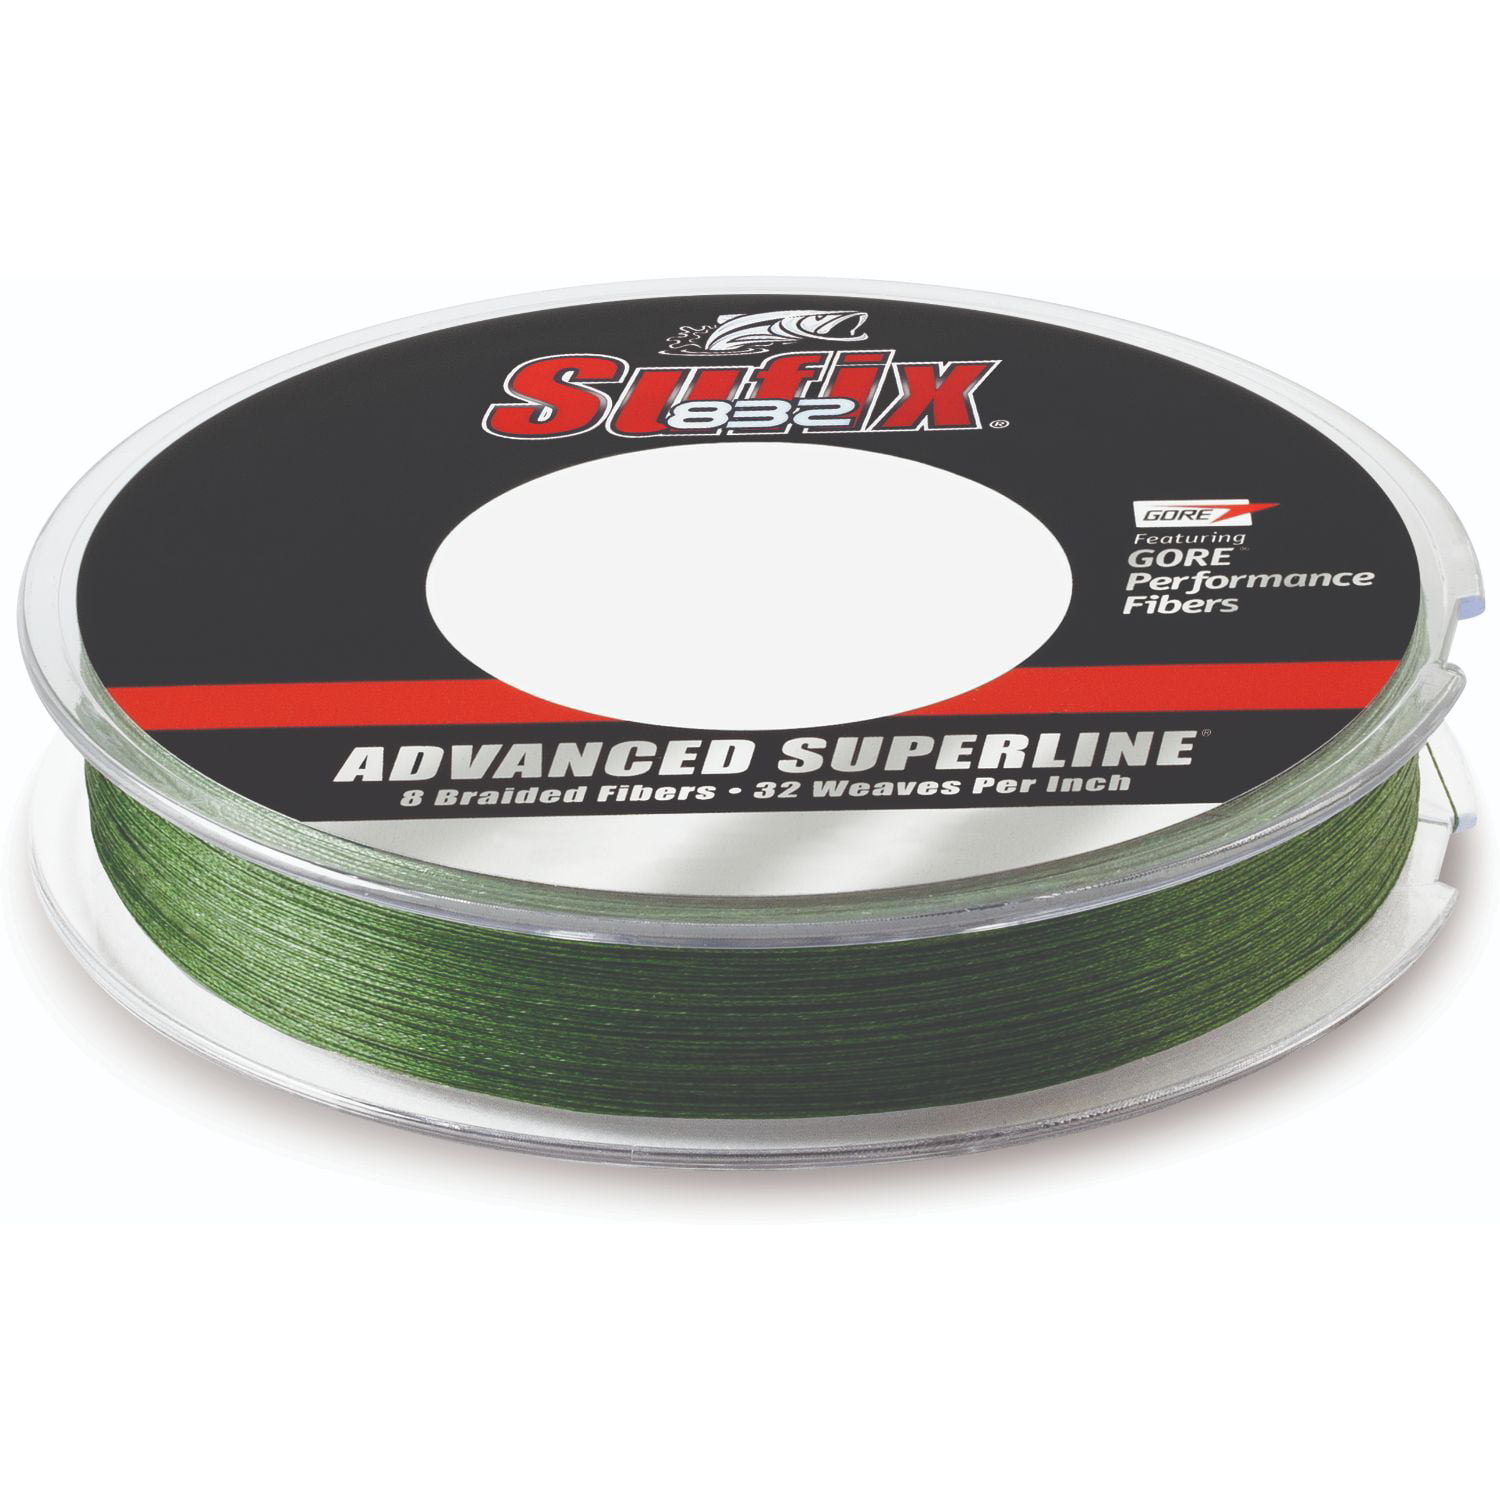 Sufix 832 Advanced Superline Ghost White 150yd 15lb Test Fishing Line 660-015GH 